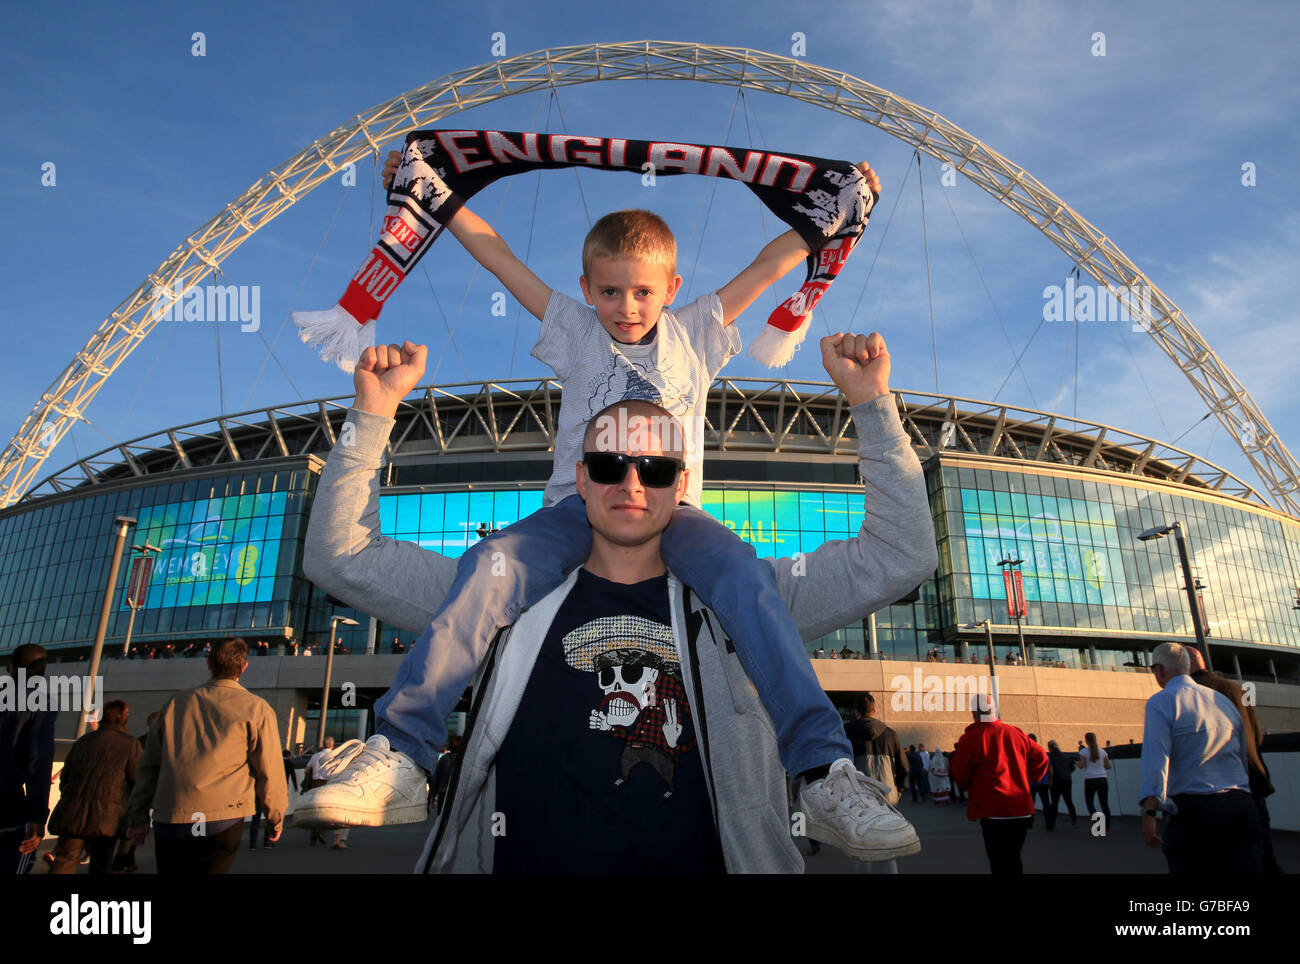 England fans Pavel and Patrick pose for a photograph on Wembley Way before the International Friendly at Wembley Stadium, London. PRESS ASSOCIATION Photo. Picture date: Wednesday September 3, 2014. See PA story SOCCER England. Photo credit should read: Nick Potts/PA Wire. Stock Photo